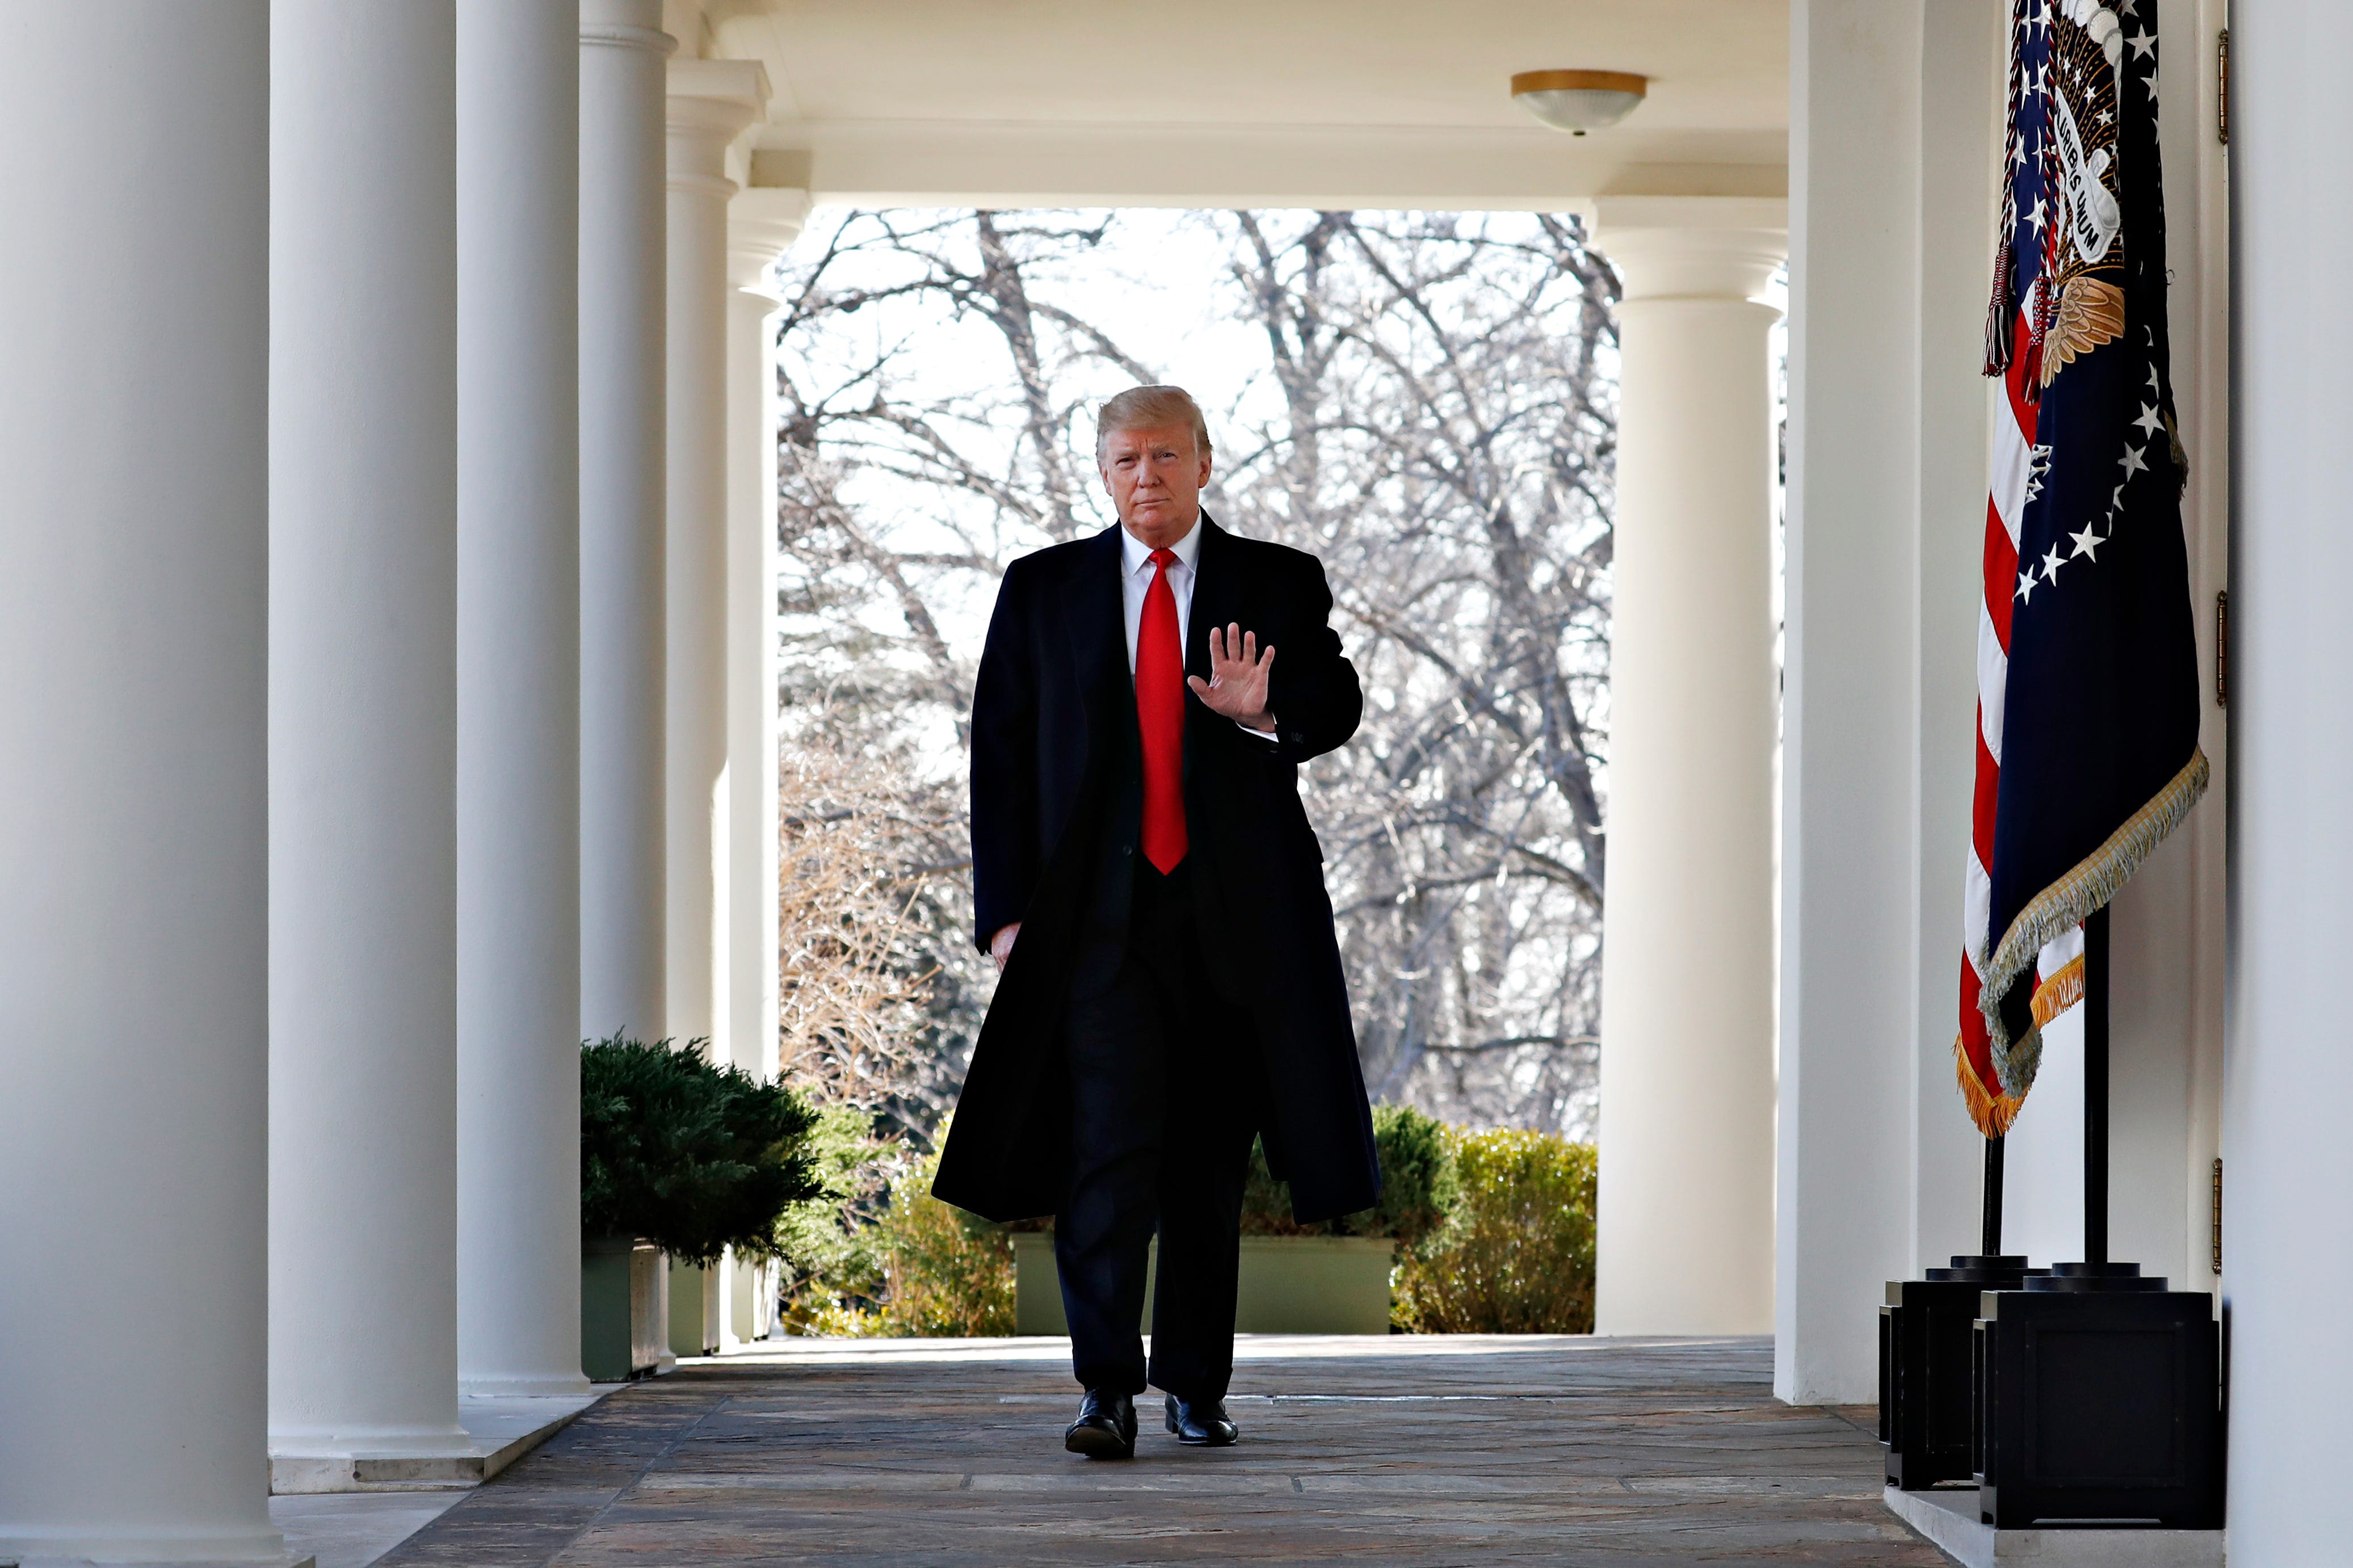 President Donald Trump waves as he walks through the Colonnade  from the Oval Office of the White House on arrival to announce a deal to temporarily reopen the government, Friday, Jan. 25, 2019, from the Rose Garden of the White House in Washington.